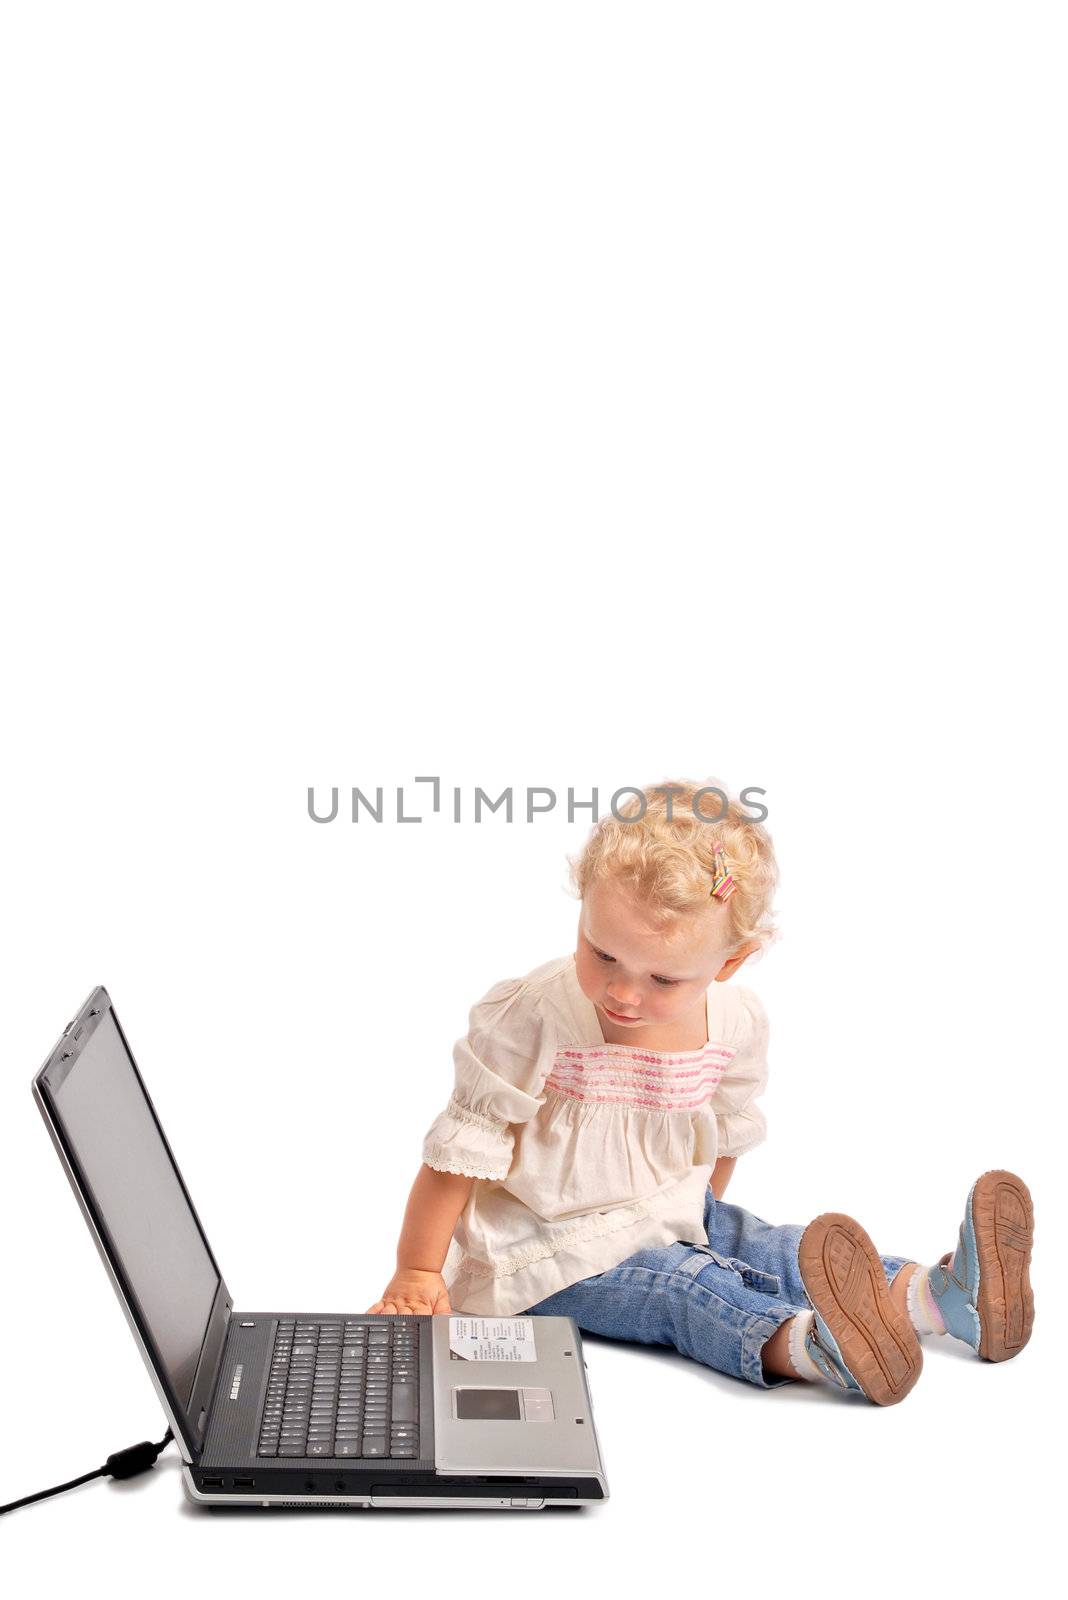 Baby girl looking curiously at a notebook on white background